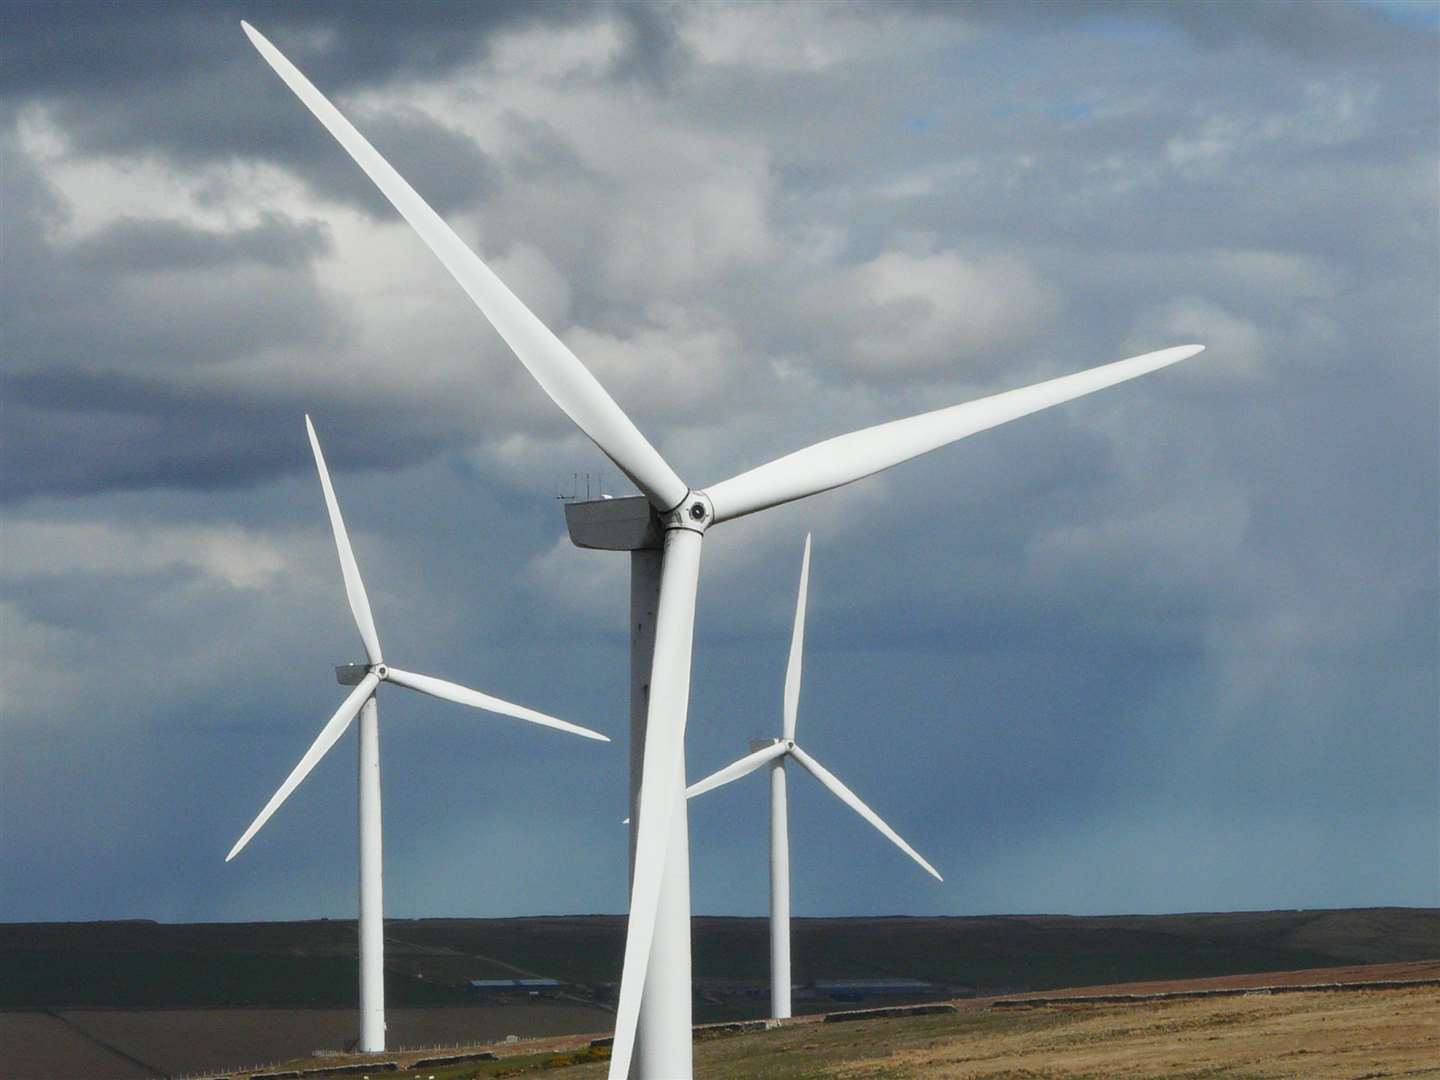 Baillie Wind Farm in north-west Caithness. The Scottish Government says onshore wind can have a positive effect on communities through skilled employment and community benefit funds. Picture: Alan Hendry